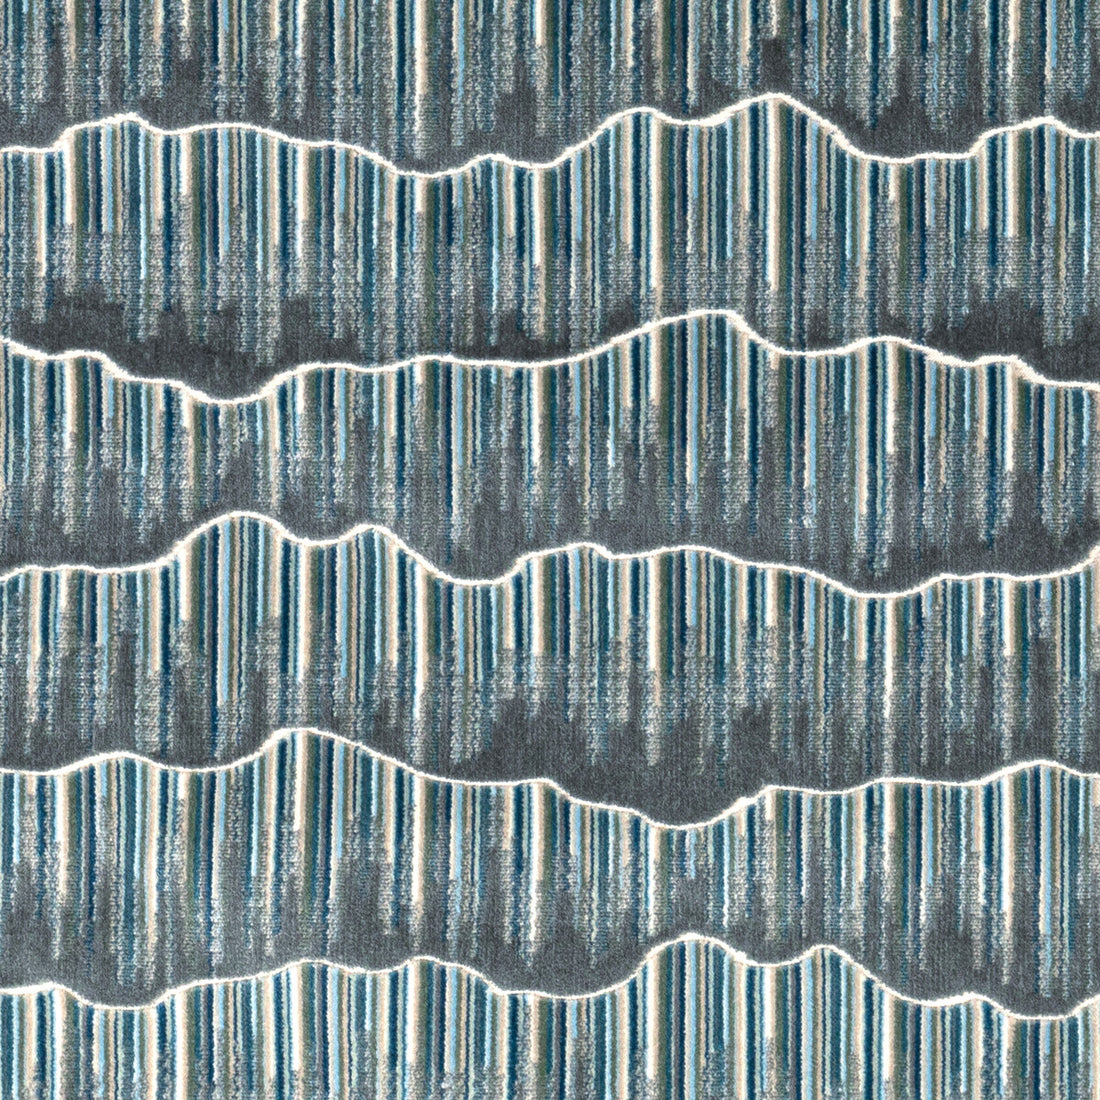 Mountainscape fabric in chambray color - pattern 36350.1511.0 - by Kravet Couture in the Modern Luxe III collection